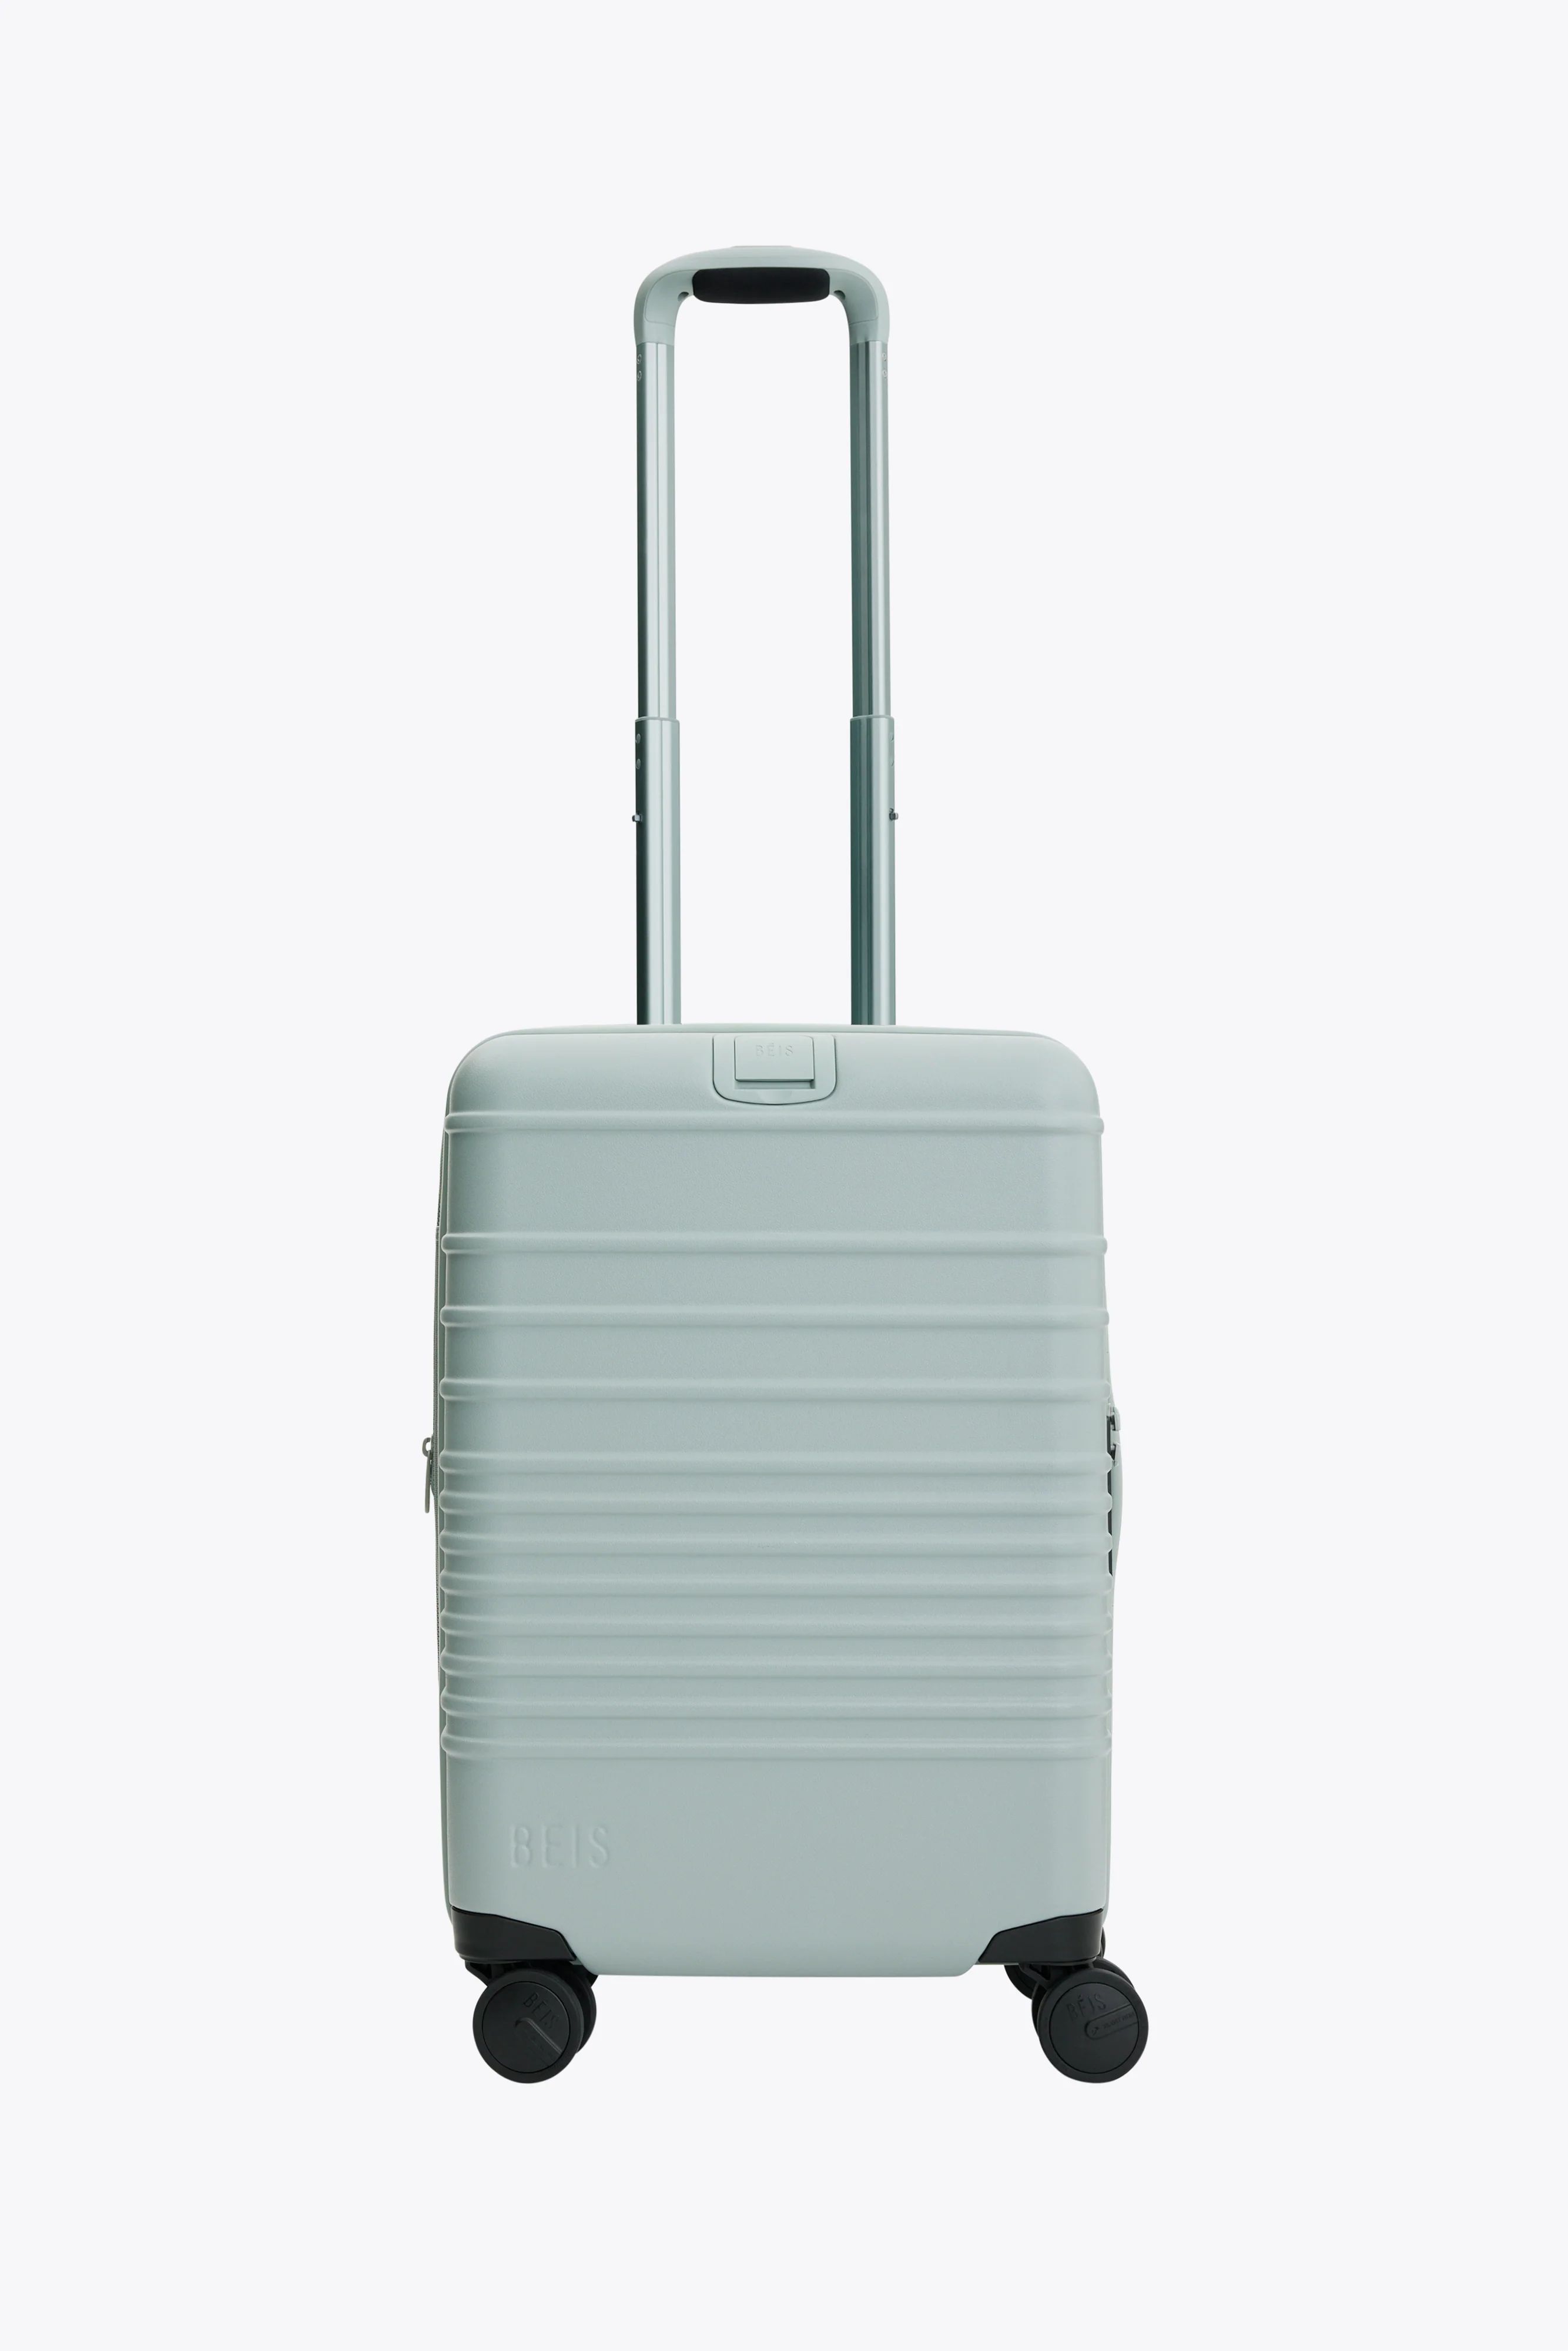 BÉIS 'The Carry-On Roller' In Slate - 21" Carry-On Slate Blue Rolling Luggage | BÉIS Travel